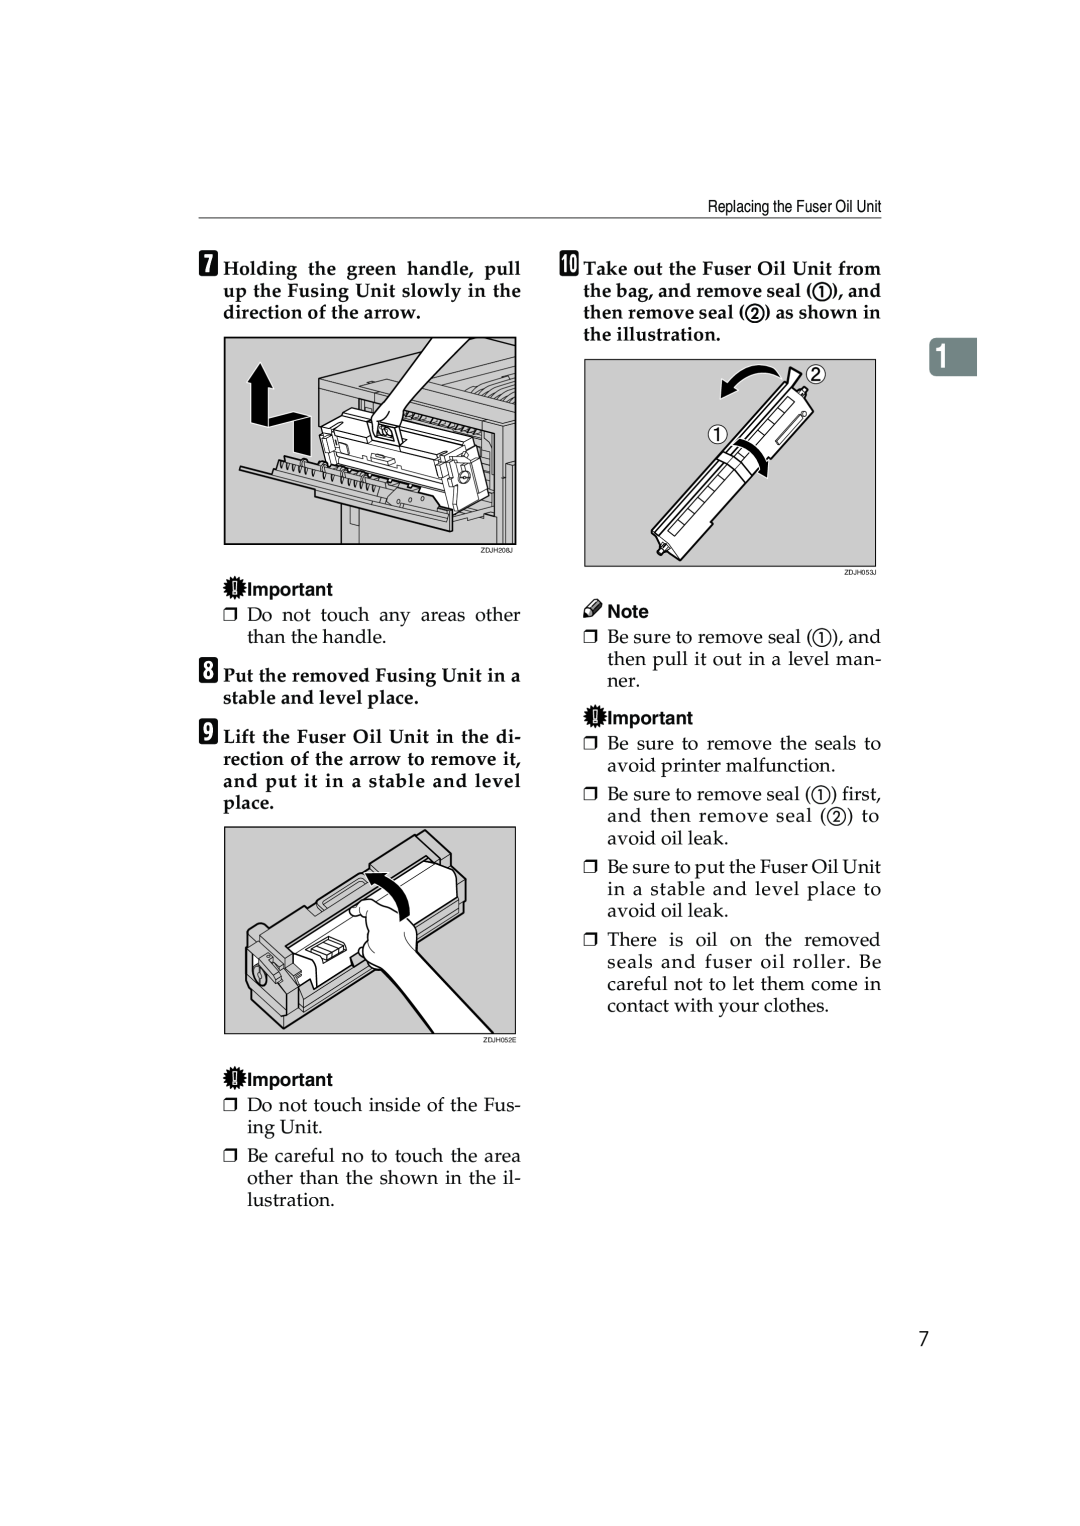 Ricoh AP3800C operating instructions Do not touch any areas other than the handle 